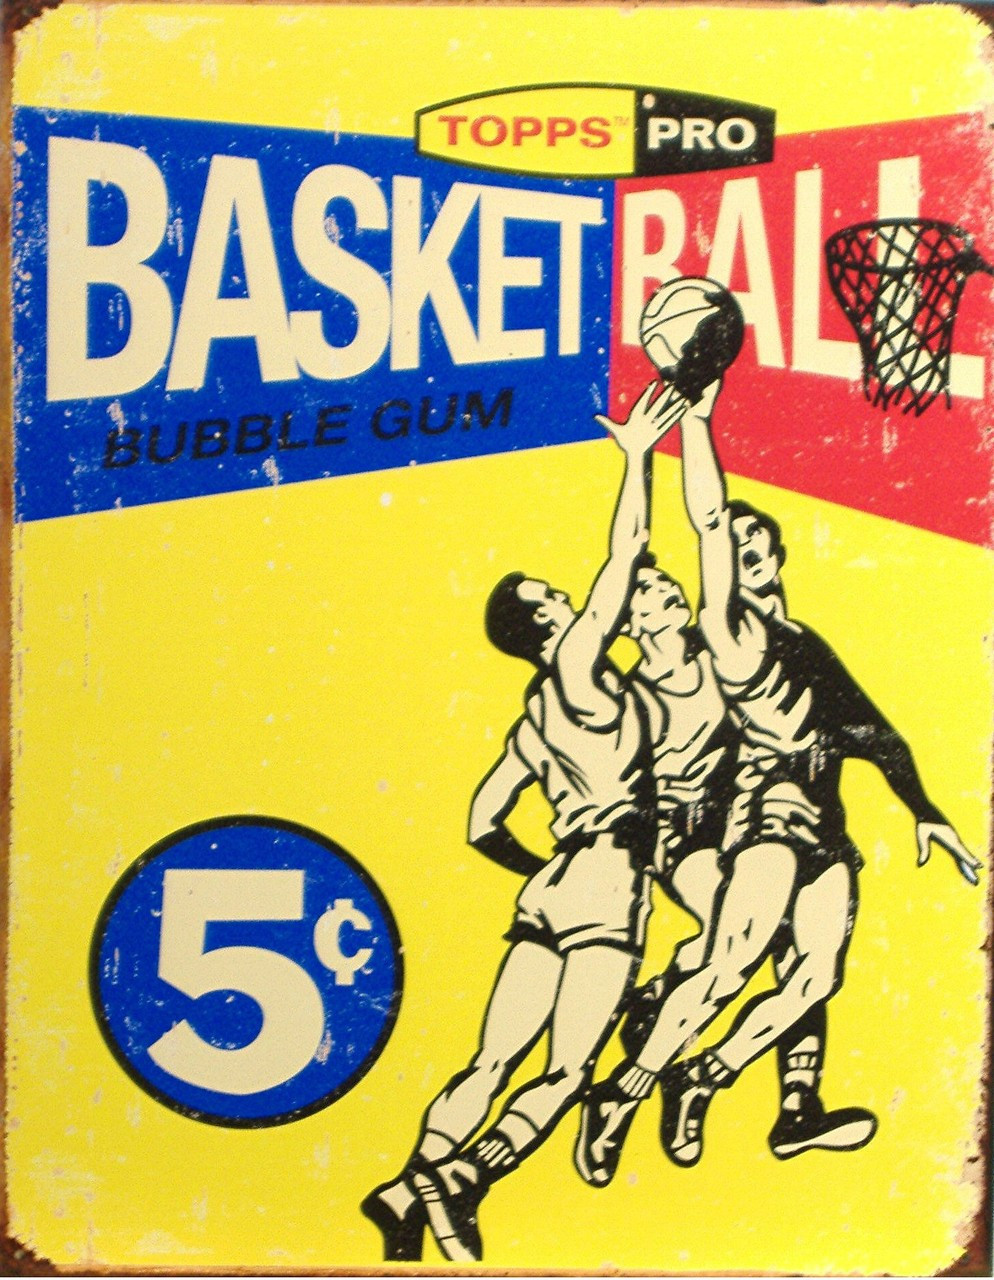 TOPPS 1957 BASKETBALL CARD BOX TOP SIGN - Old Time Signs